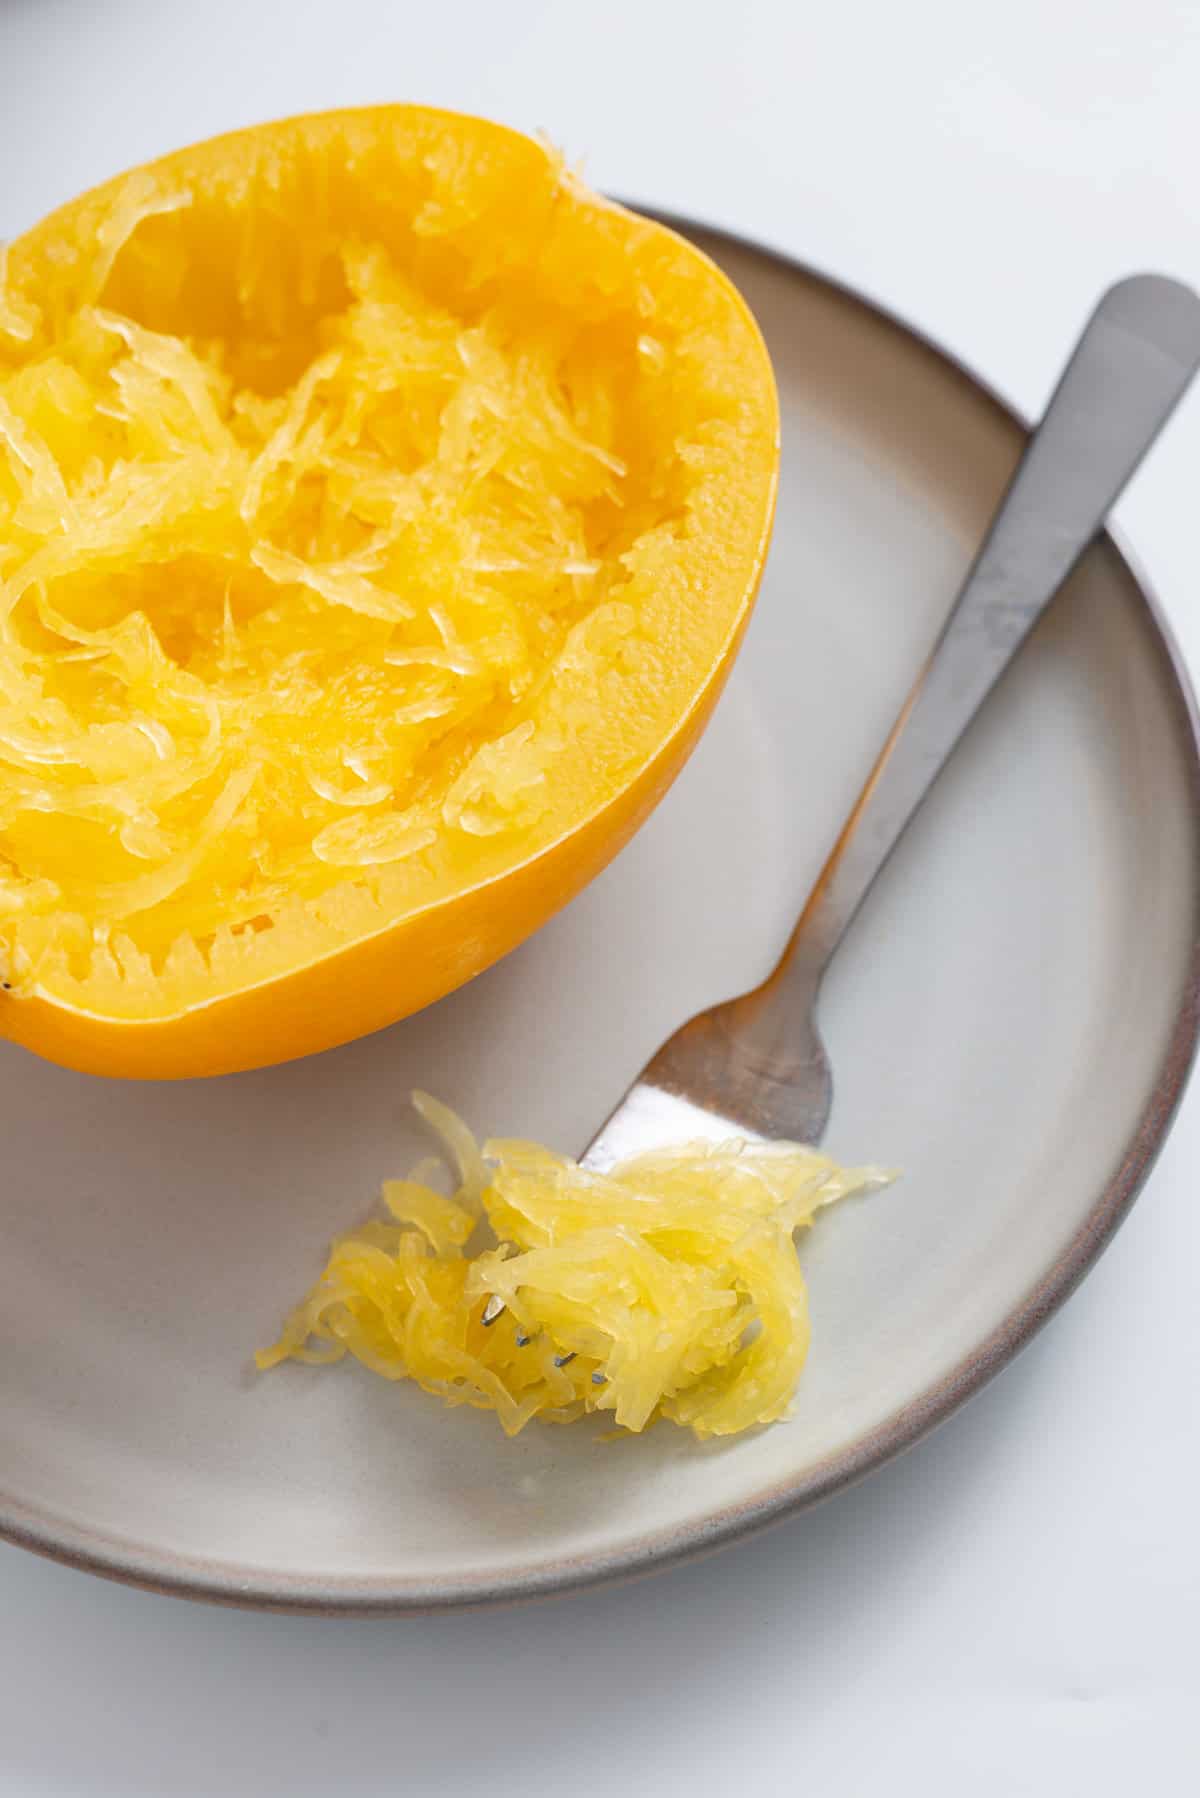 An image of cooked spaghetti squash with a fork with spaghetti strands on the side.